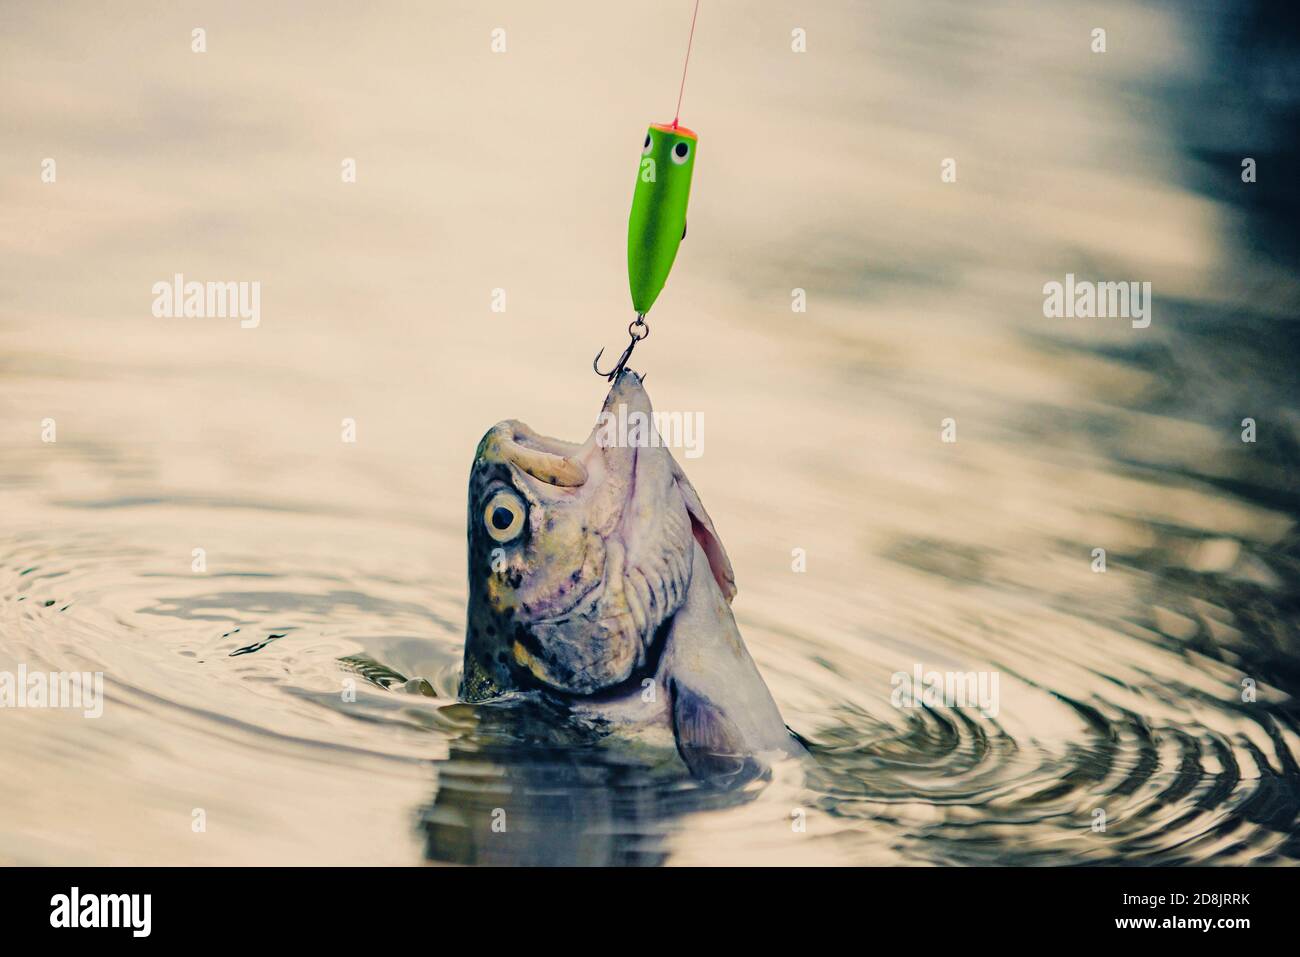 https://c8.alamy.com/comp/2D8JRRK/catches-a-fish-sport-fishing-fishing-with-spinning-reel-catching-a-big-fish-with-a-fishing-pole-2D8JRRK.jpg